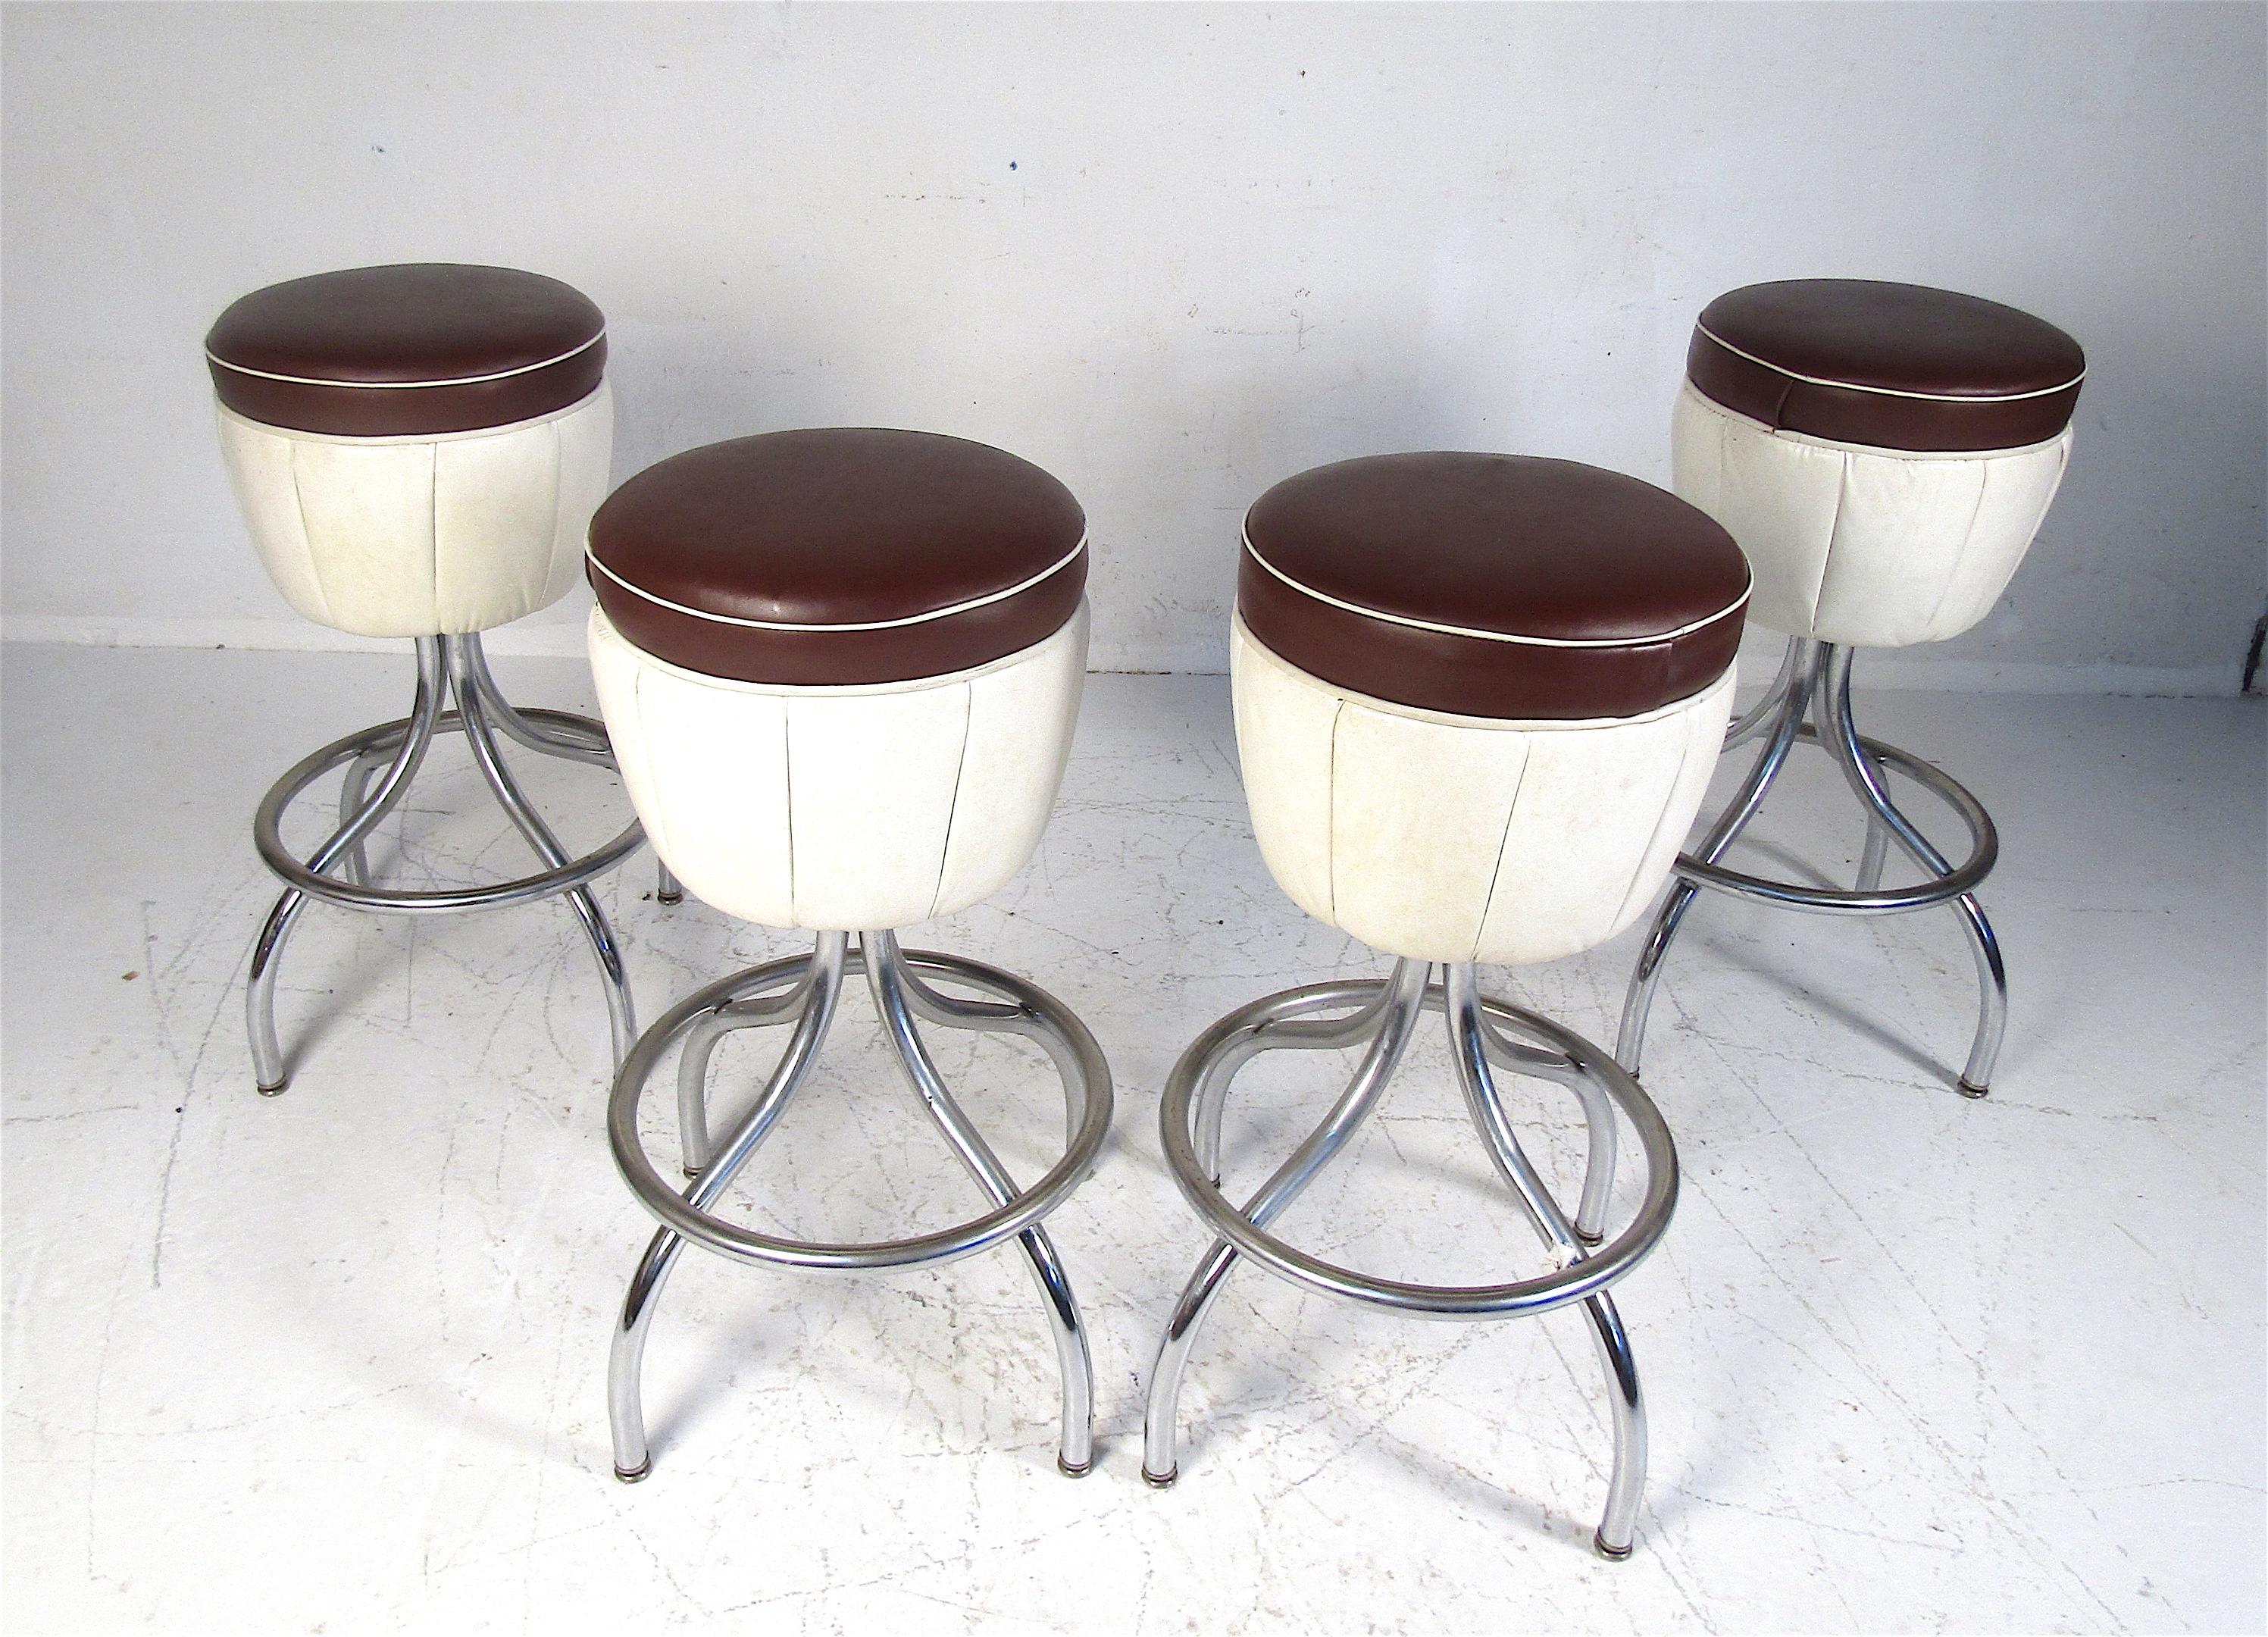 This stunning set of four vintage modern bar stools feature a backless seat and a chrome base with a footrest. The two-tone vinyl is sure to complement any setting. Please confirm the item location (NY or NJ).